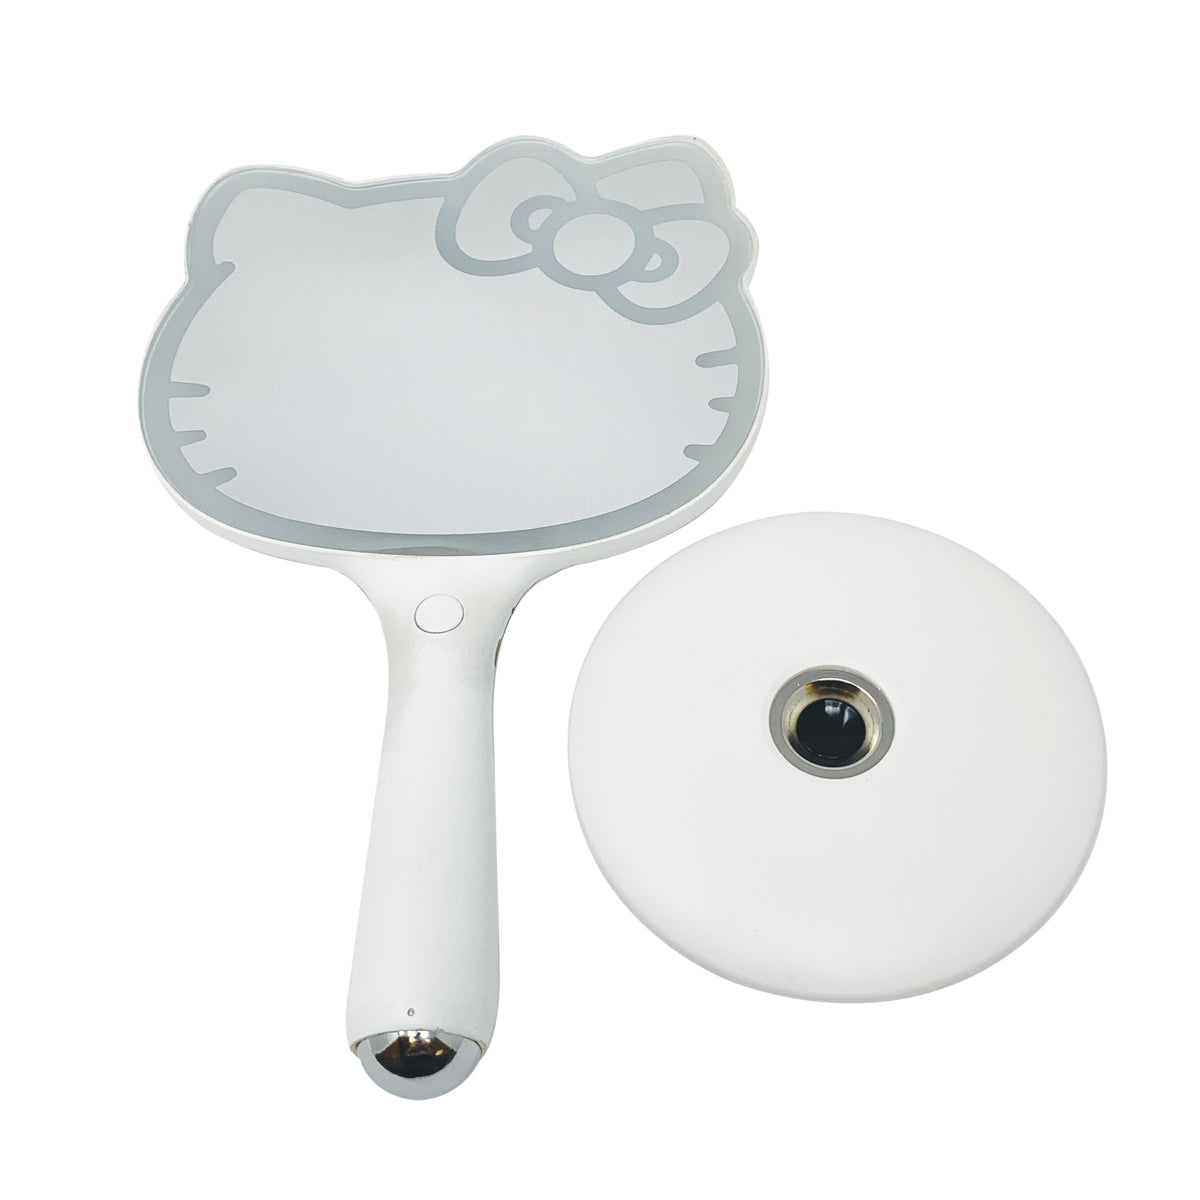 Impressions Hello Kitty LED Handheld Mirror, Makeup Vanity Mirror with Standing Base and Adjustable Brightness